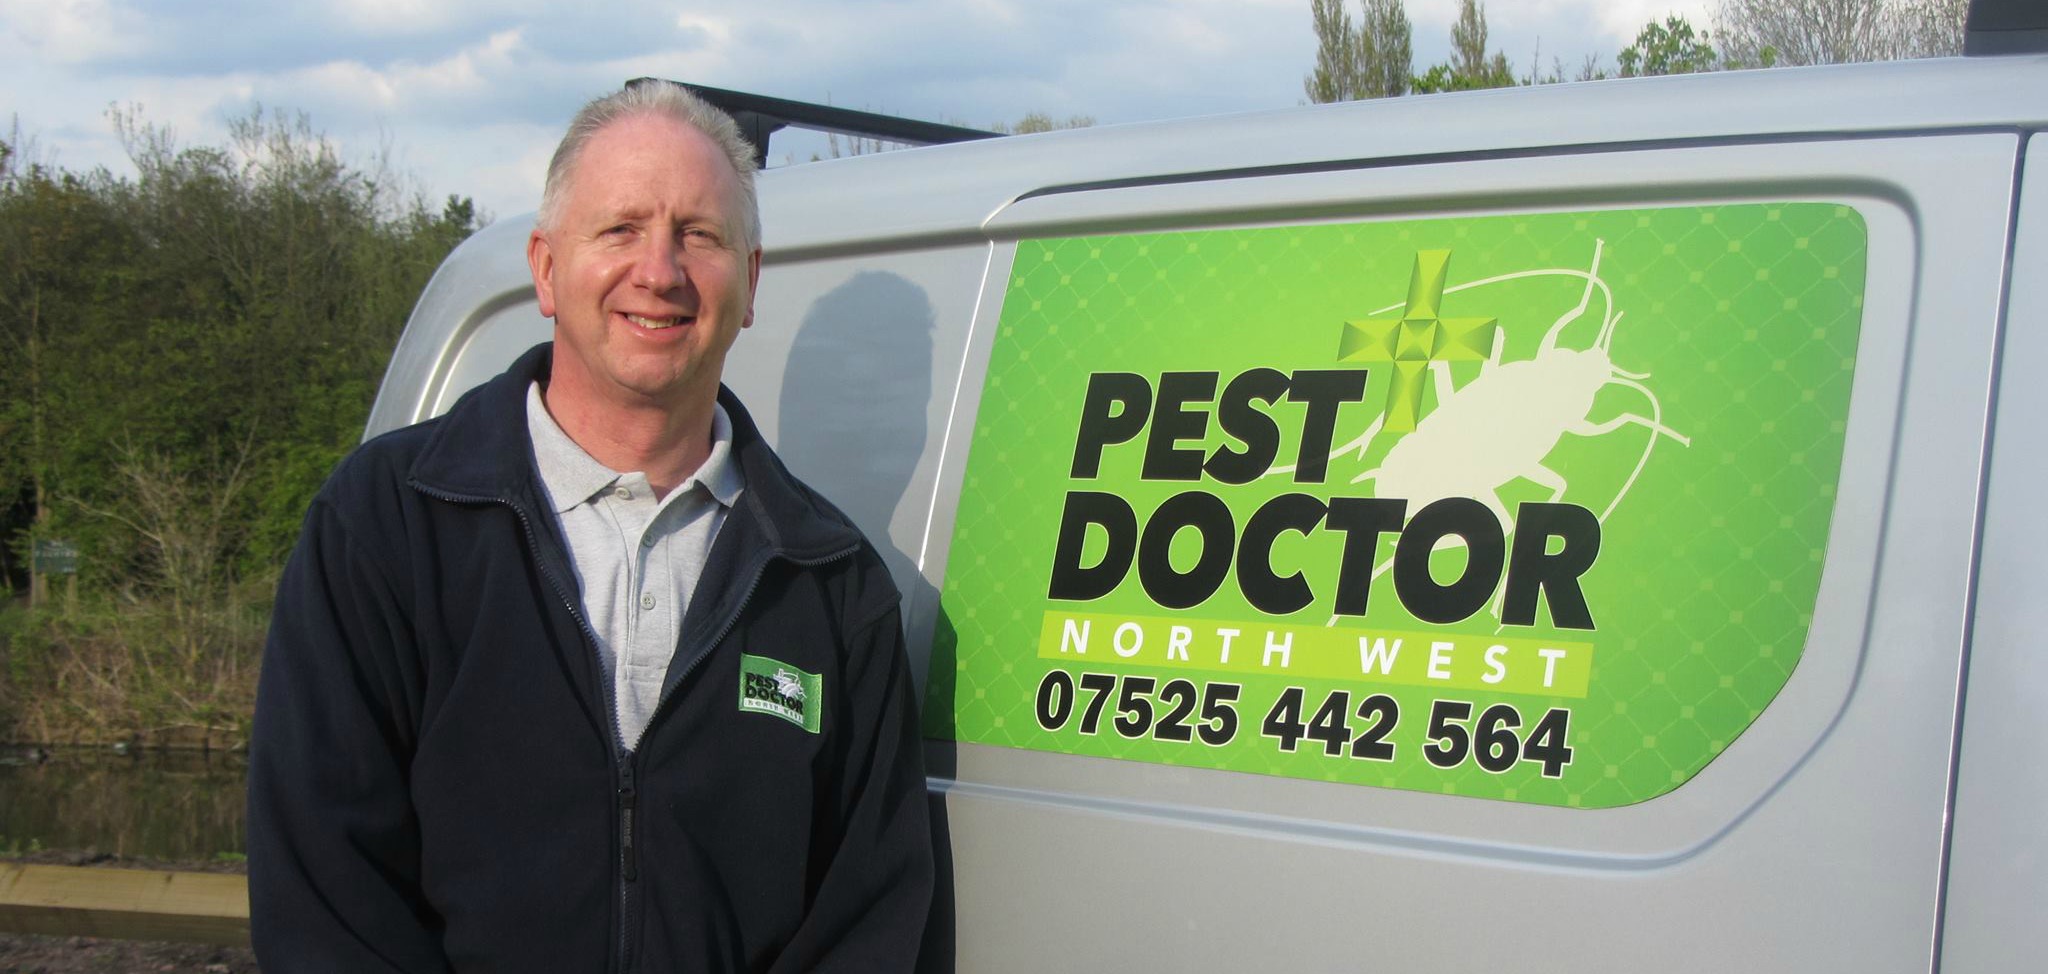 Pest control expert Nigel from Pest Doctor North West